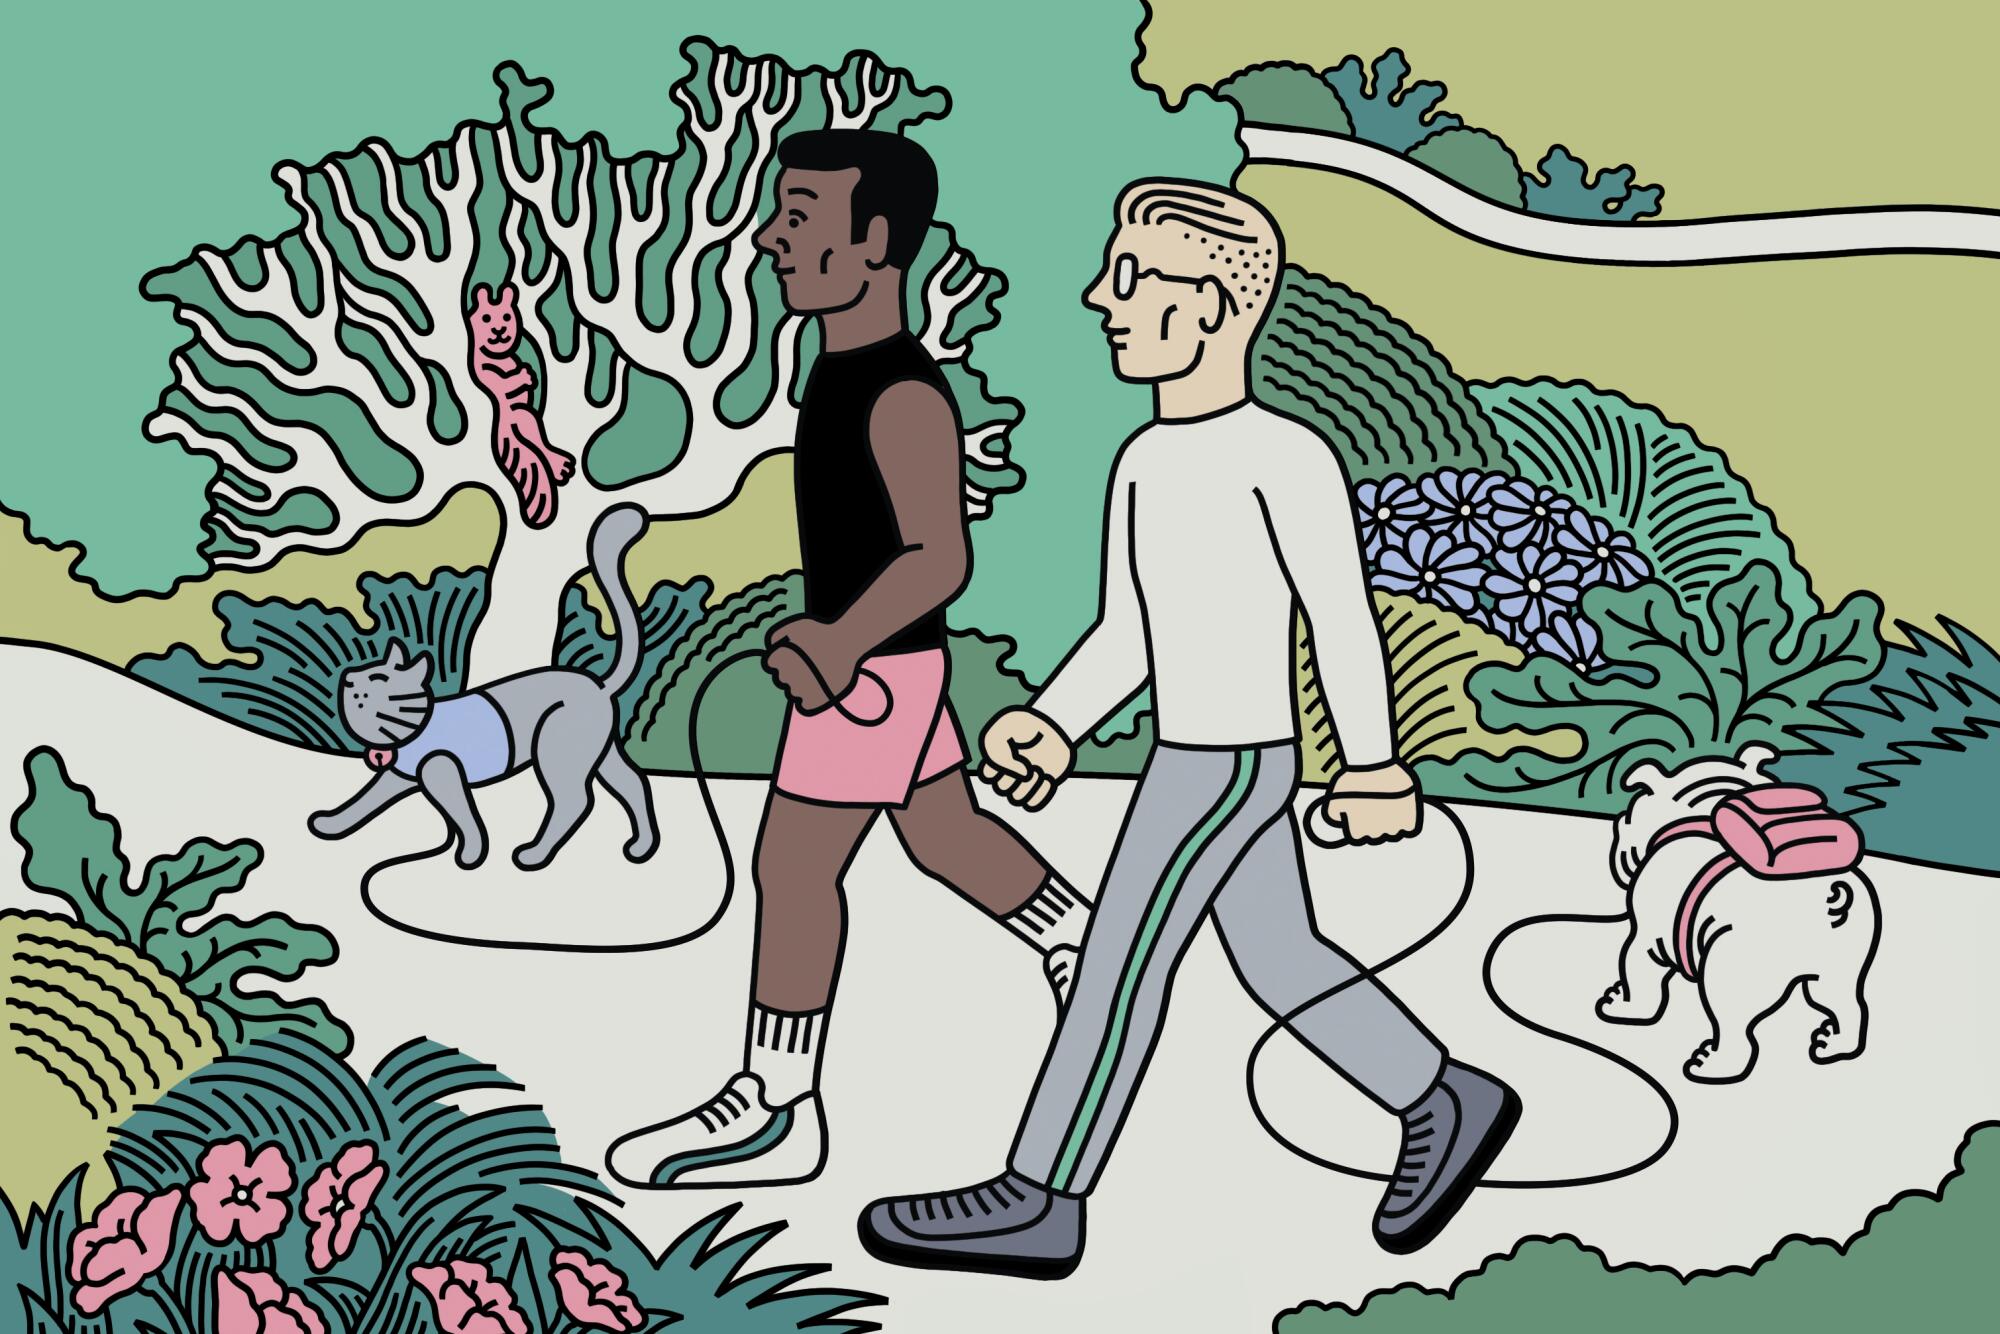 An illustration of two men hiking with their pets on leashes